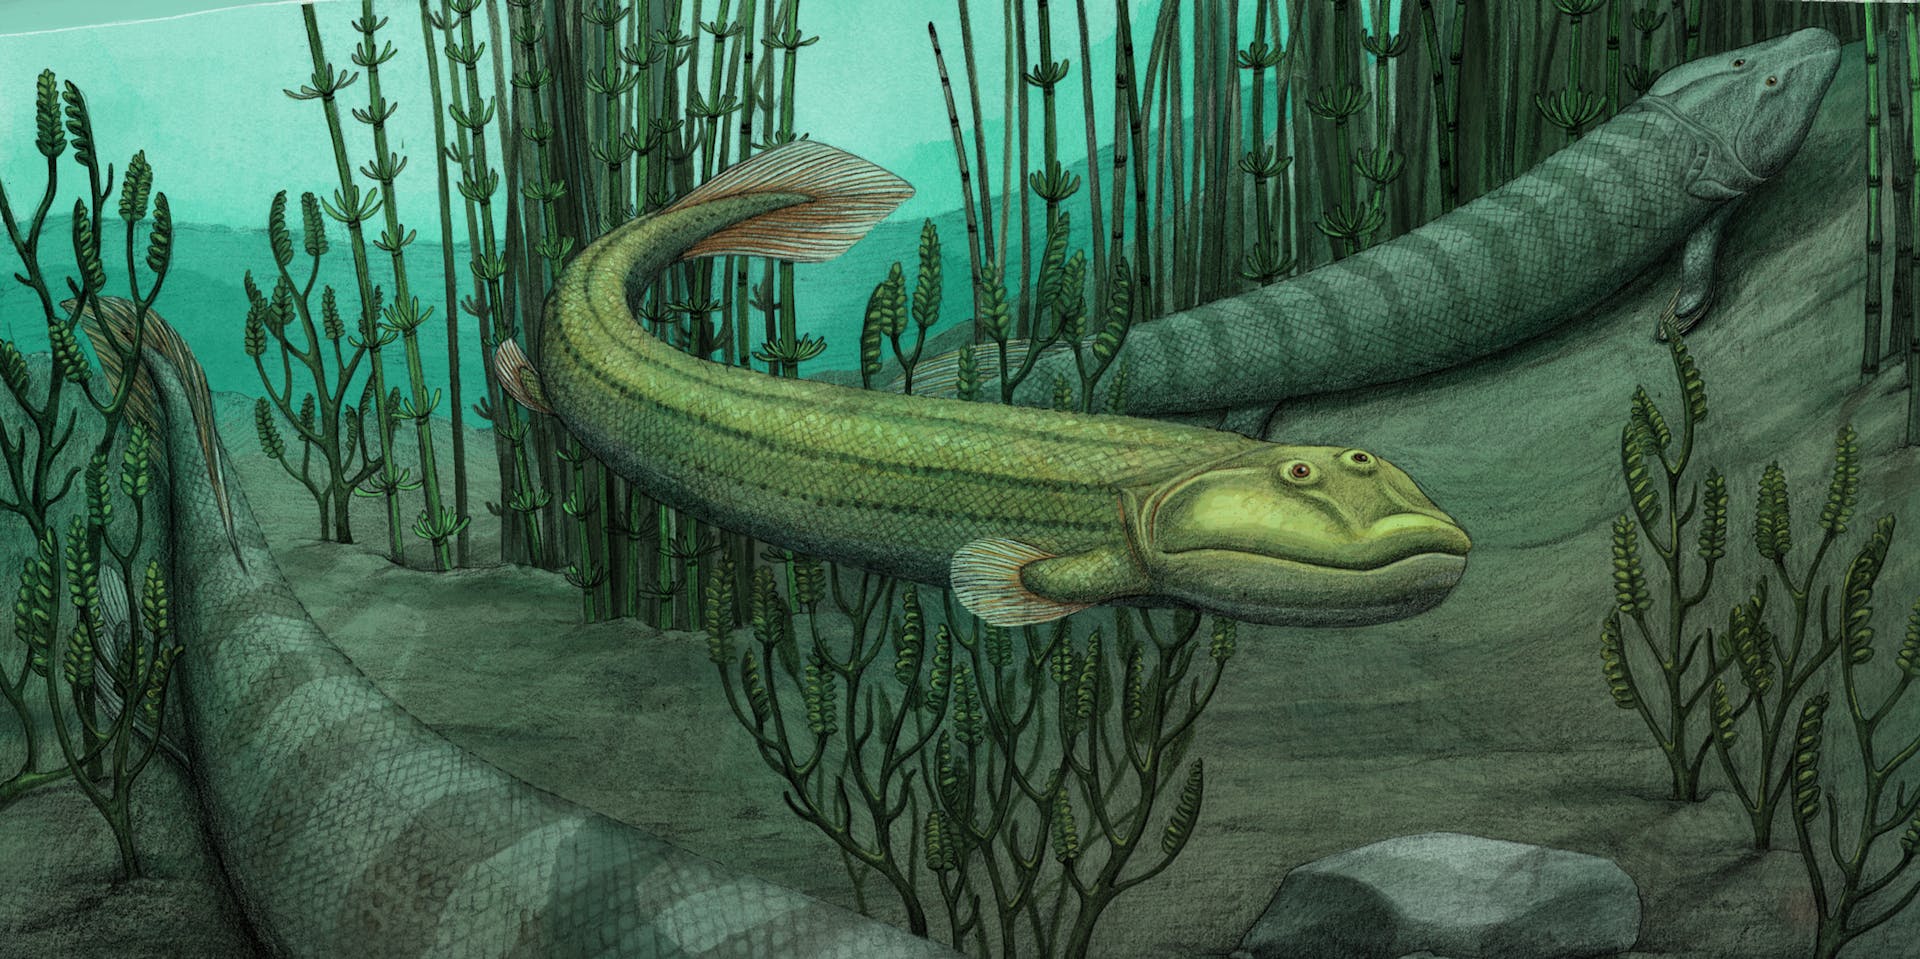 artist's depiction of qikiqtania, a fish with four fins that are less capable of supporting itself on land